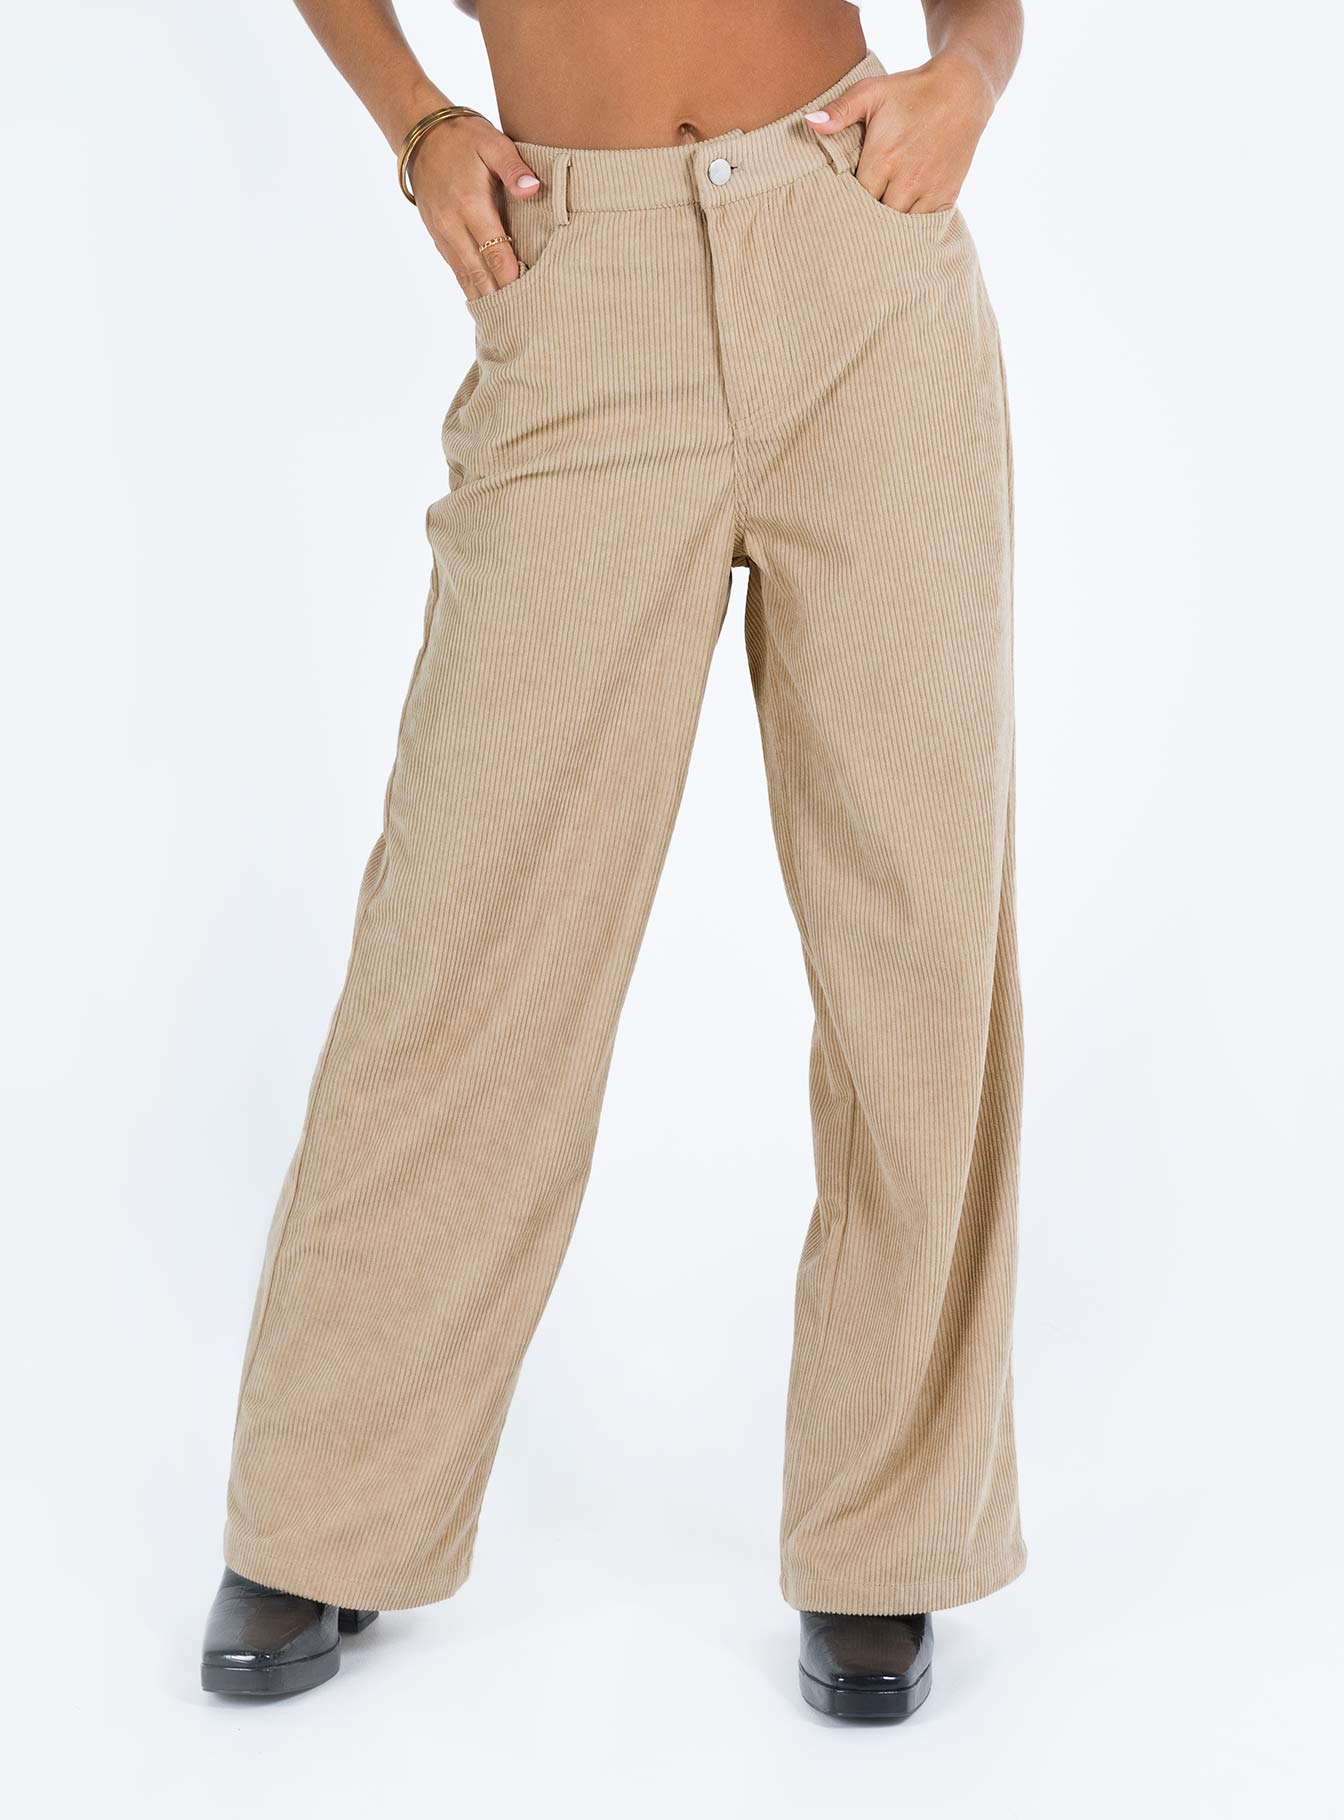 Buy Olive Trousers & Pants for Women by AND Online | Ajio.com